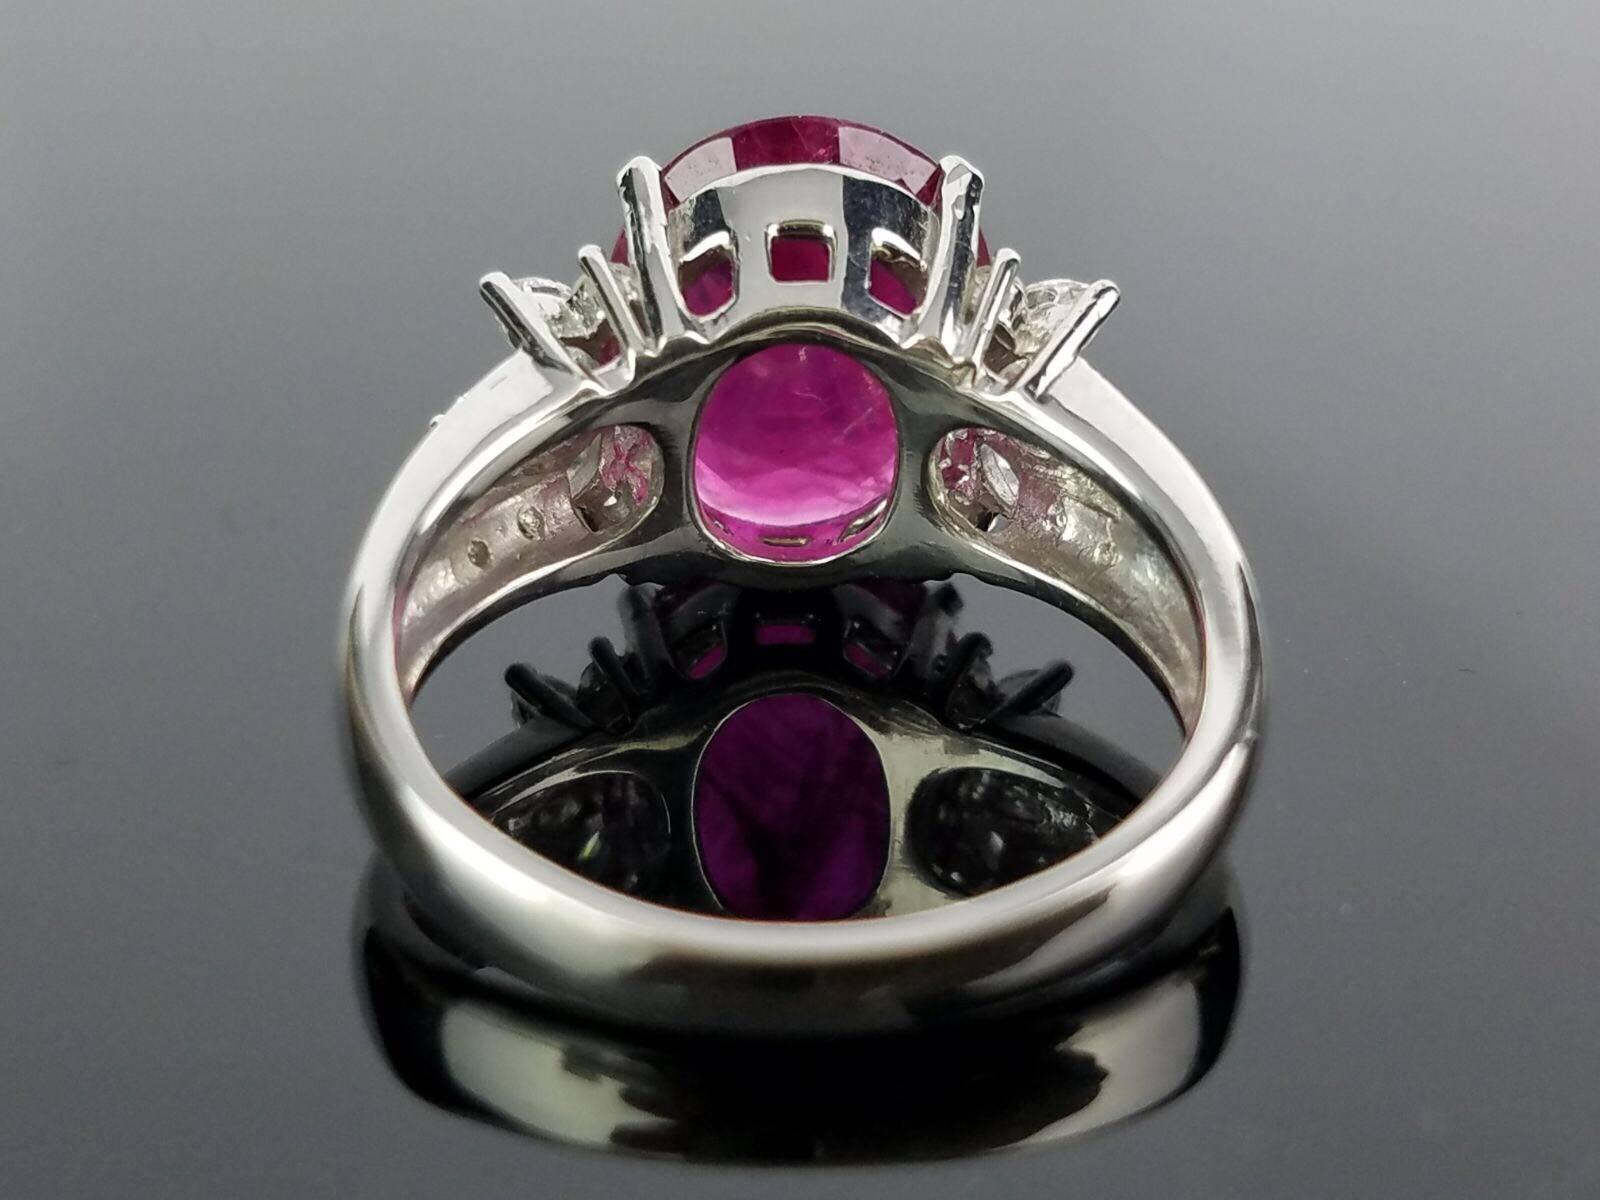 Art Deco 3.12 Carat Burma Ruby and Diamond Cocktail Ring with a Platinum Band